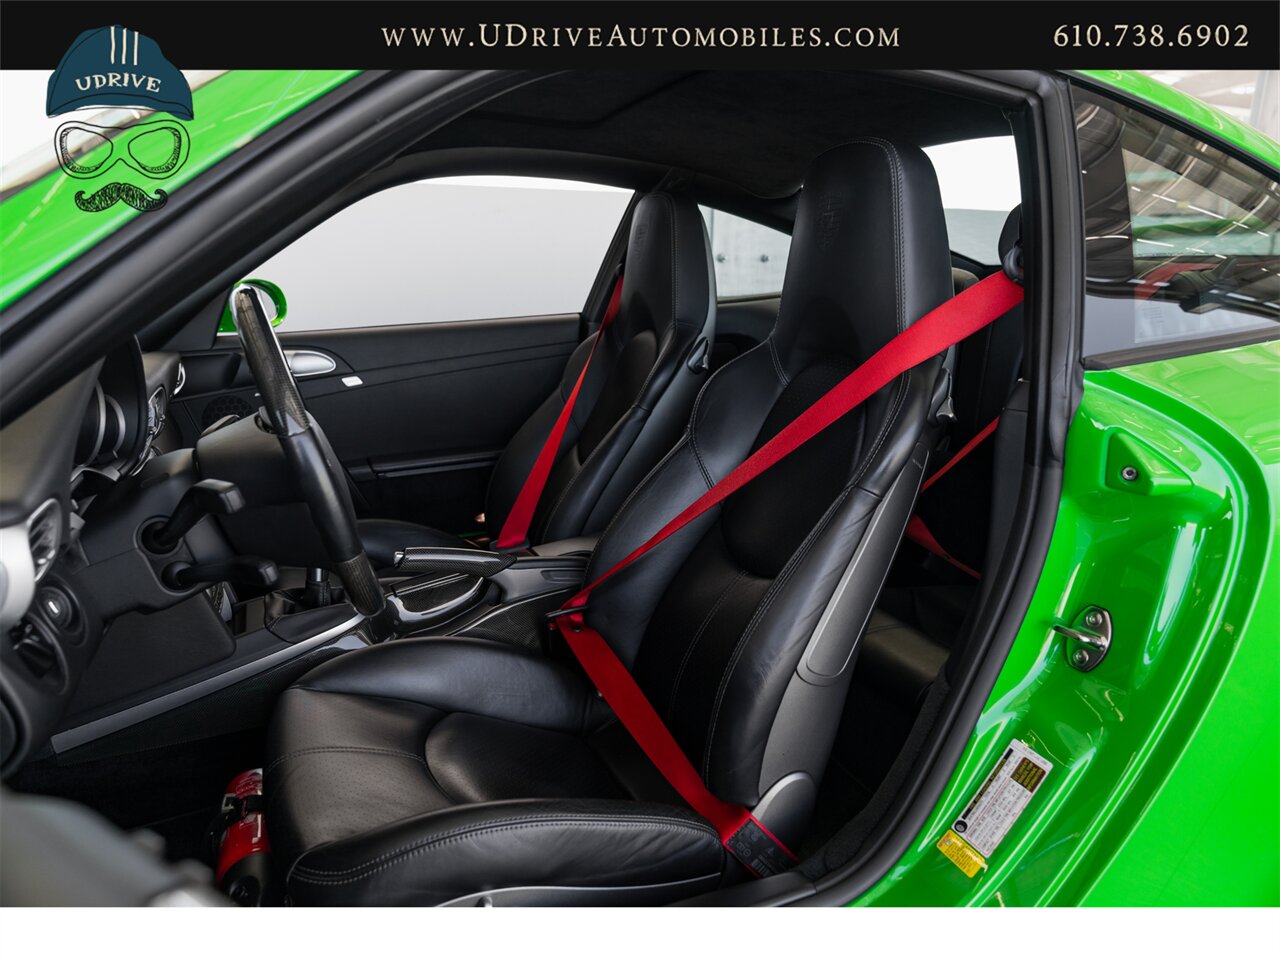 2006 Porsche 911 Carrera 4S  997 PTS Signal Green 6Sp Sport Sts Spt Chrono Spt Exhst - Photo 7 - West Chester, PA 19382